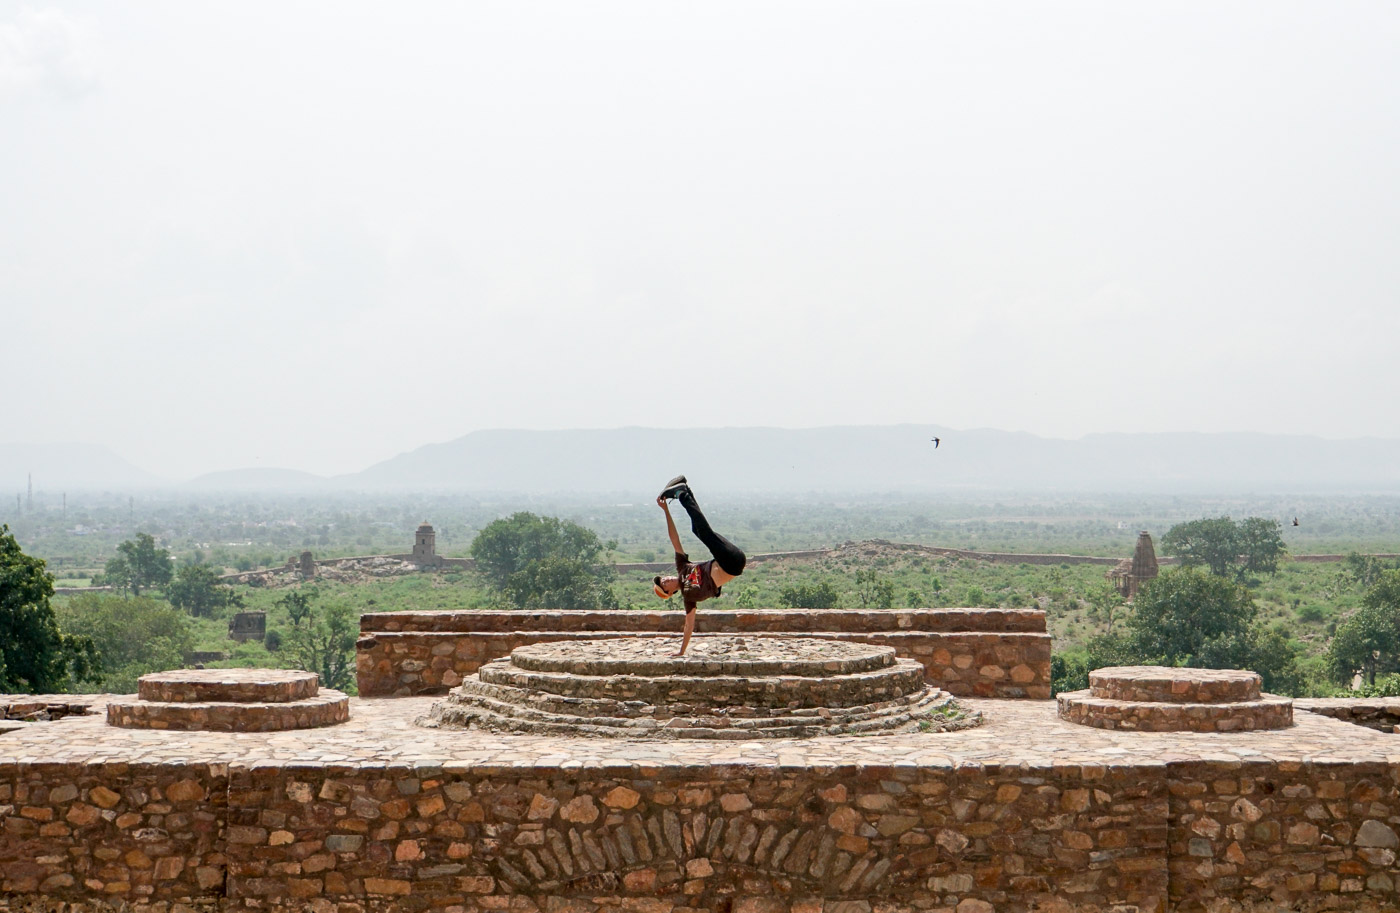 india-bhangarh-fort-sony-α6300-review-4